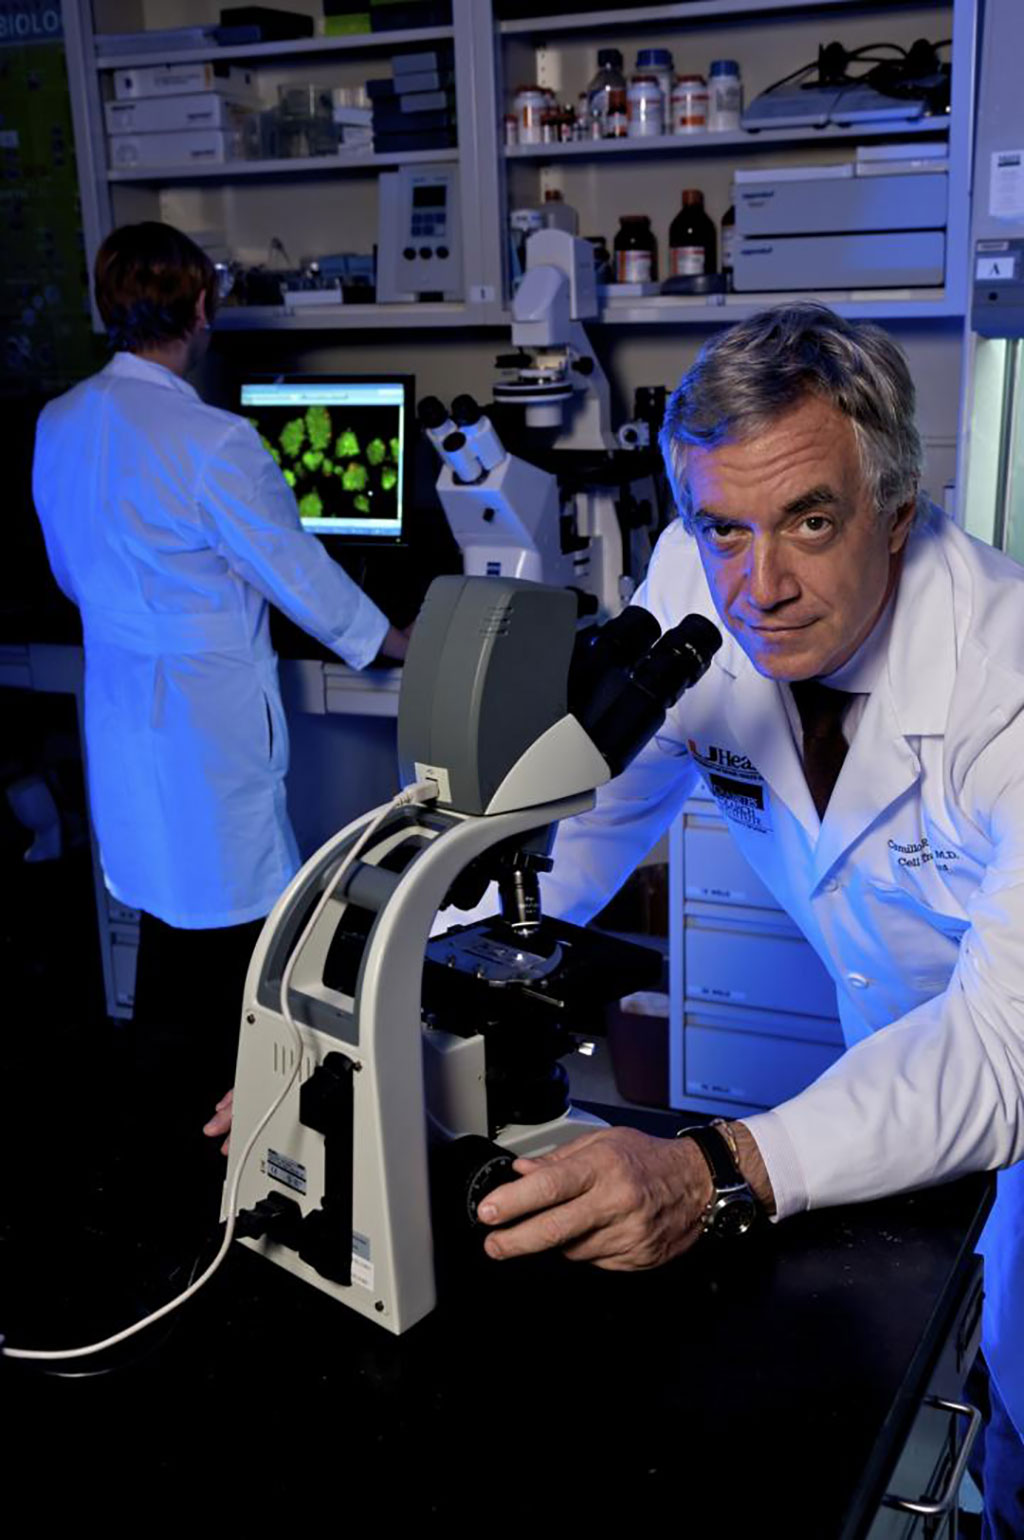 Image: Camillo Ricordi, M.D., director of the Diabetes Research Institute (DRI) and Cell Transplant Center at the University of Miami Miller School of Medicine (Photo courtesy of University of Miami Health System)